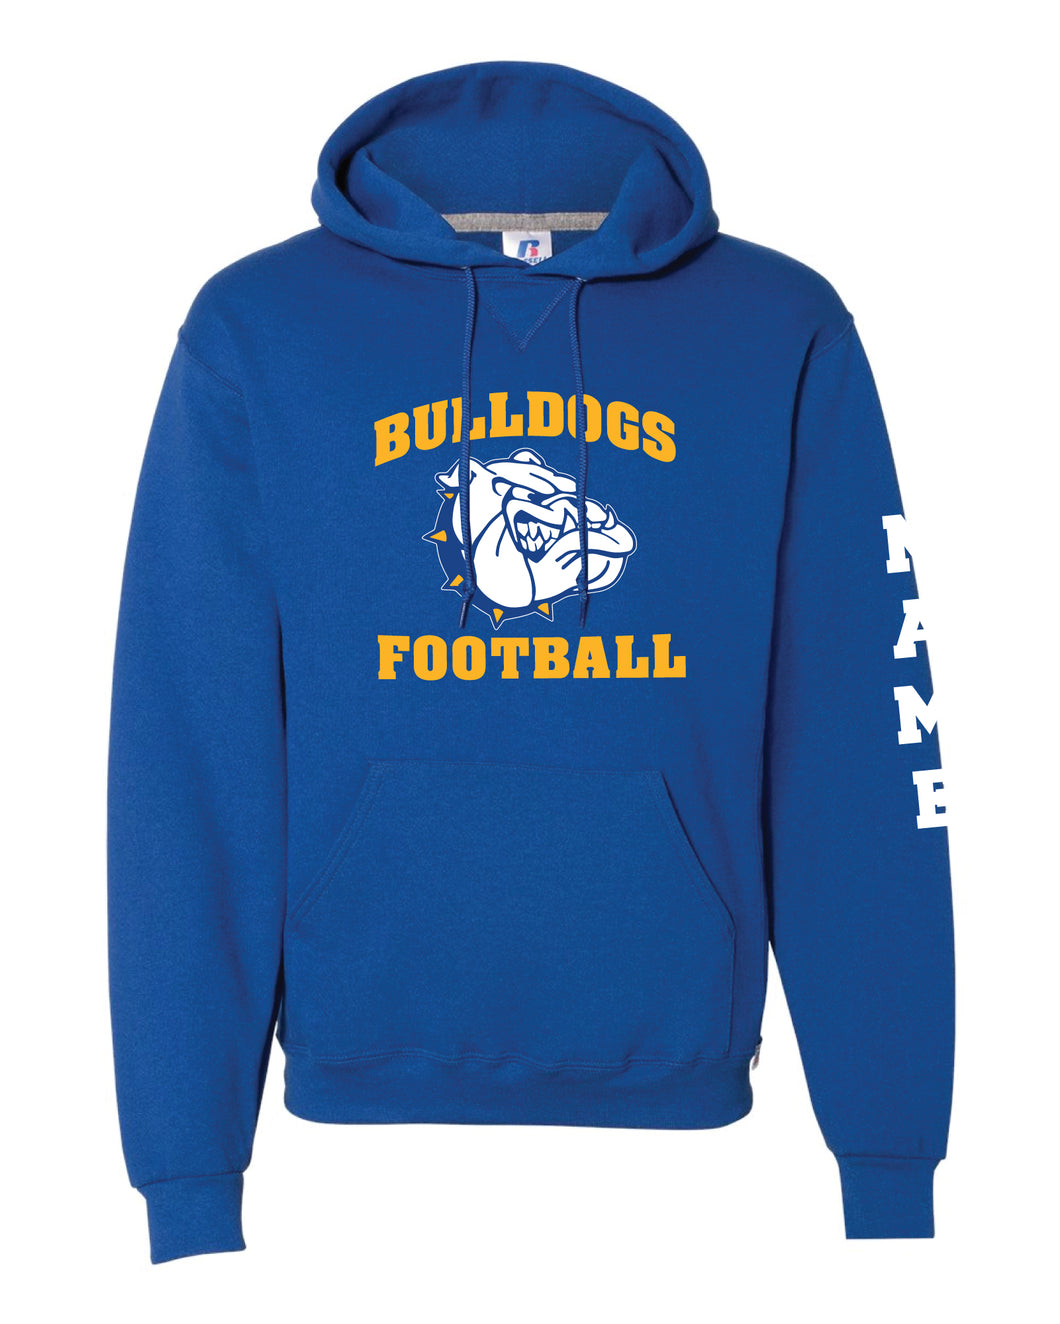 BBYC Bulldogs Football Russell Athletic Cotton Hoodie - Royal Blue